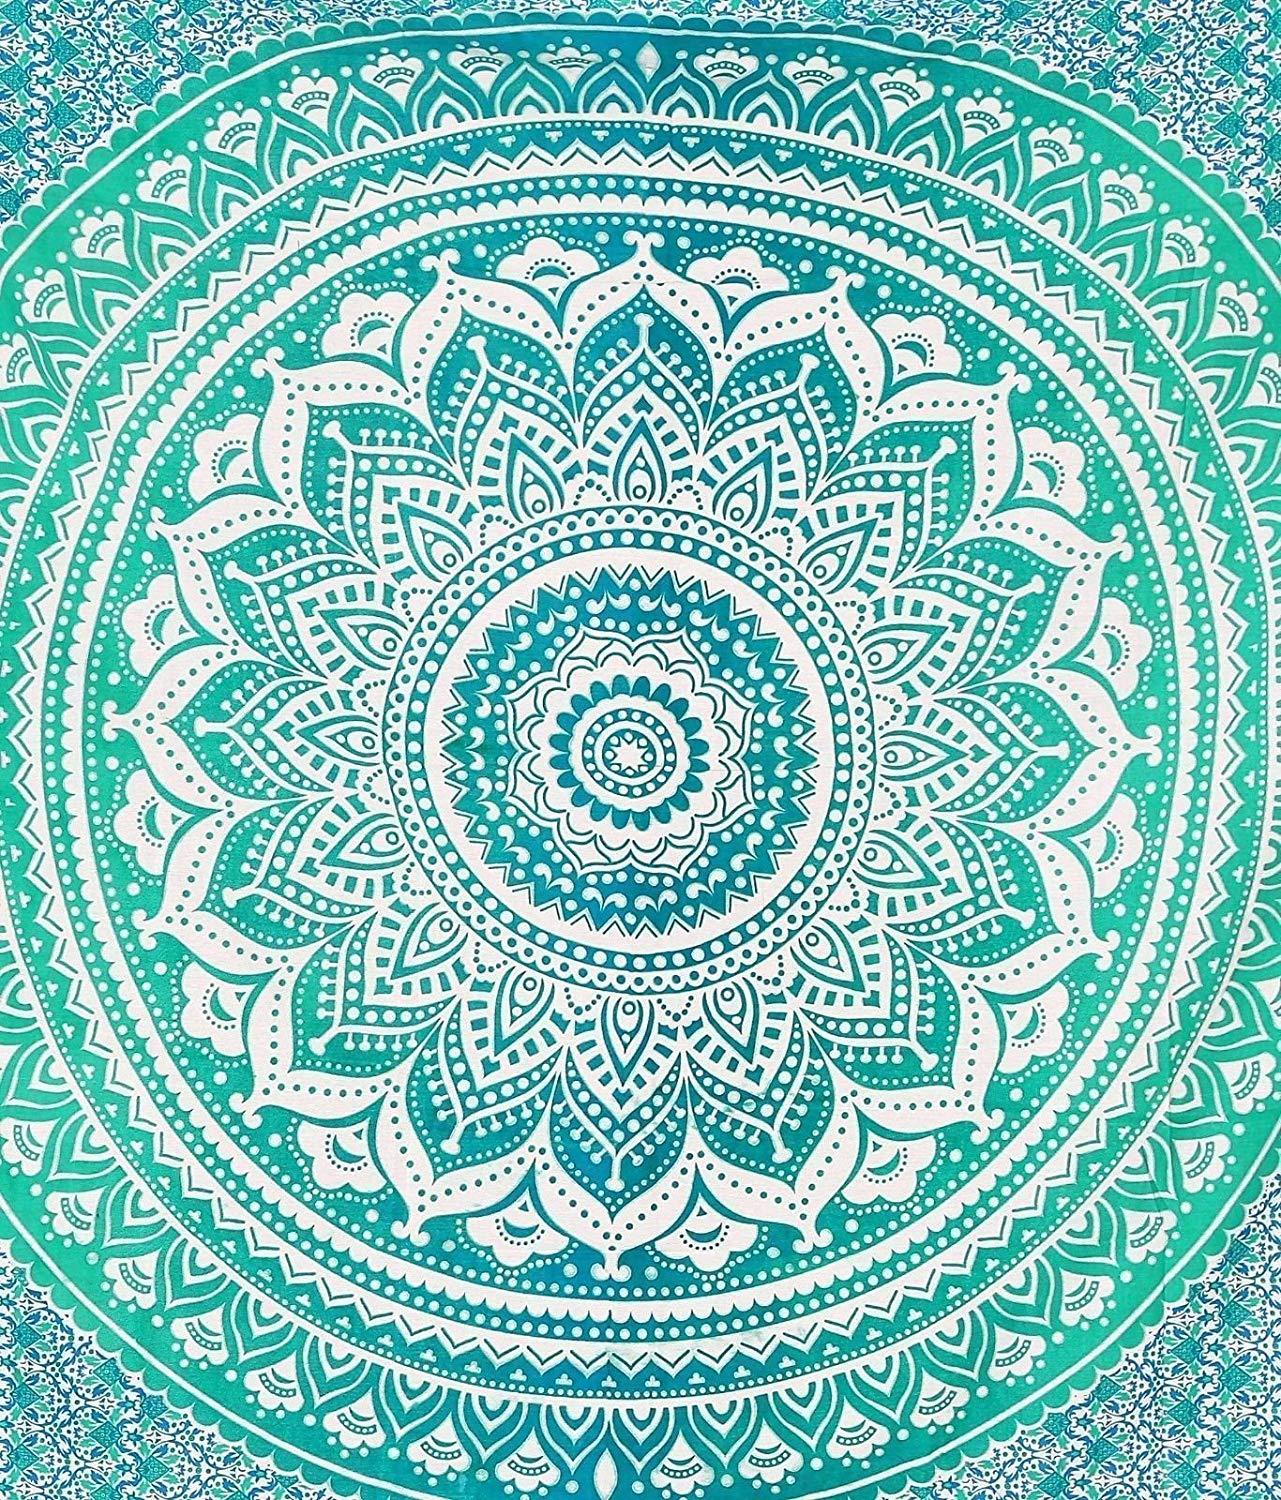 RawyalCrafts Green Ombre Tapestry, Indian Hippie Tapestry